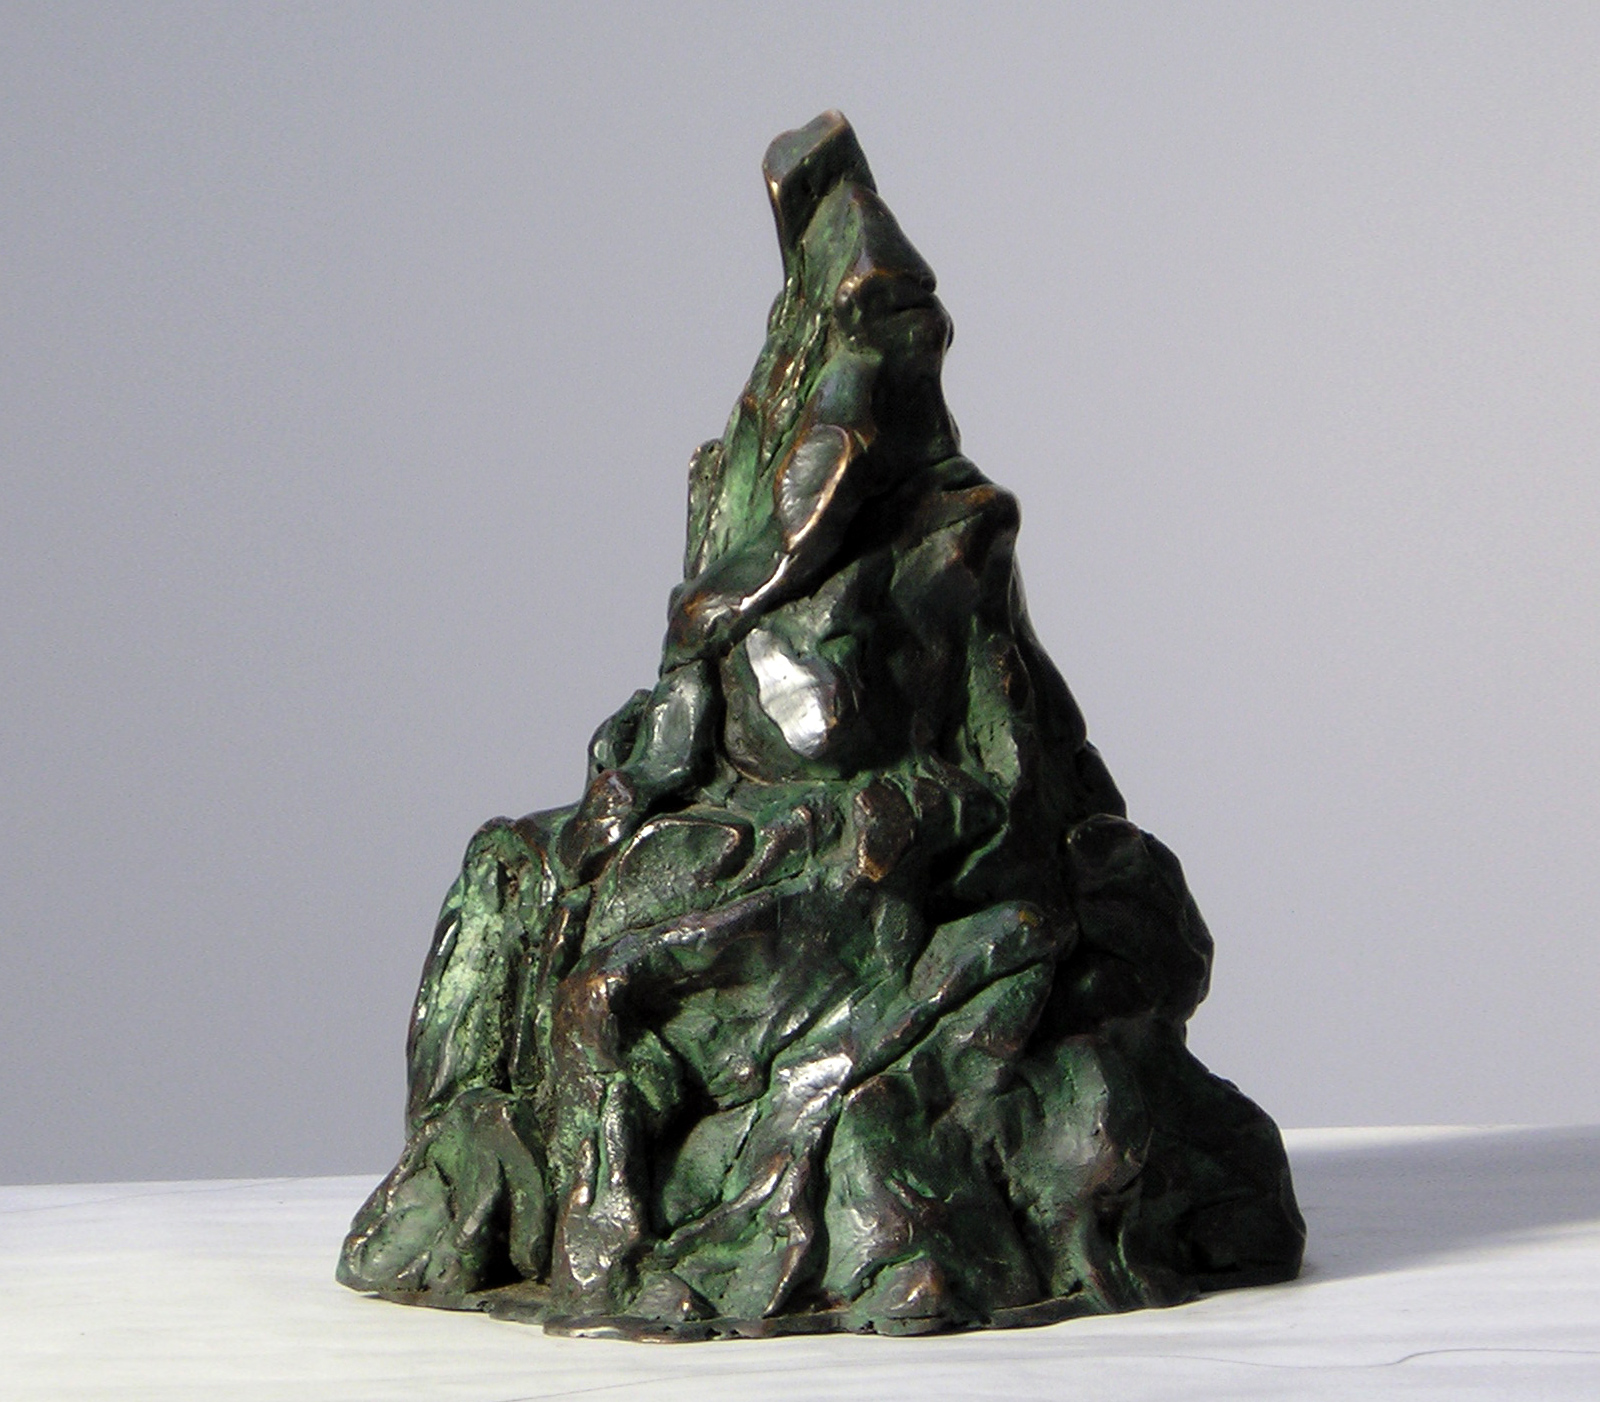 Mountain, 2003, sculpture by Adrian Mauriks.